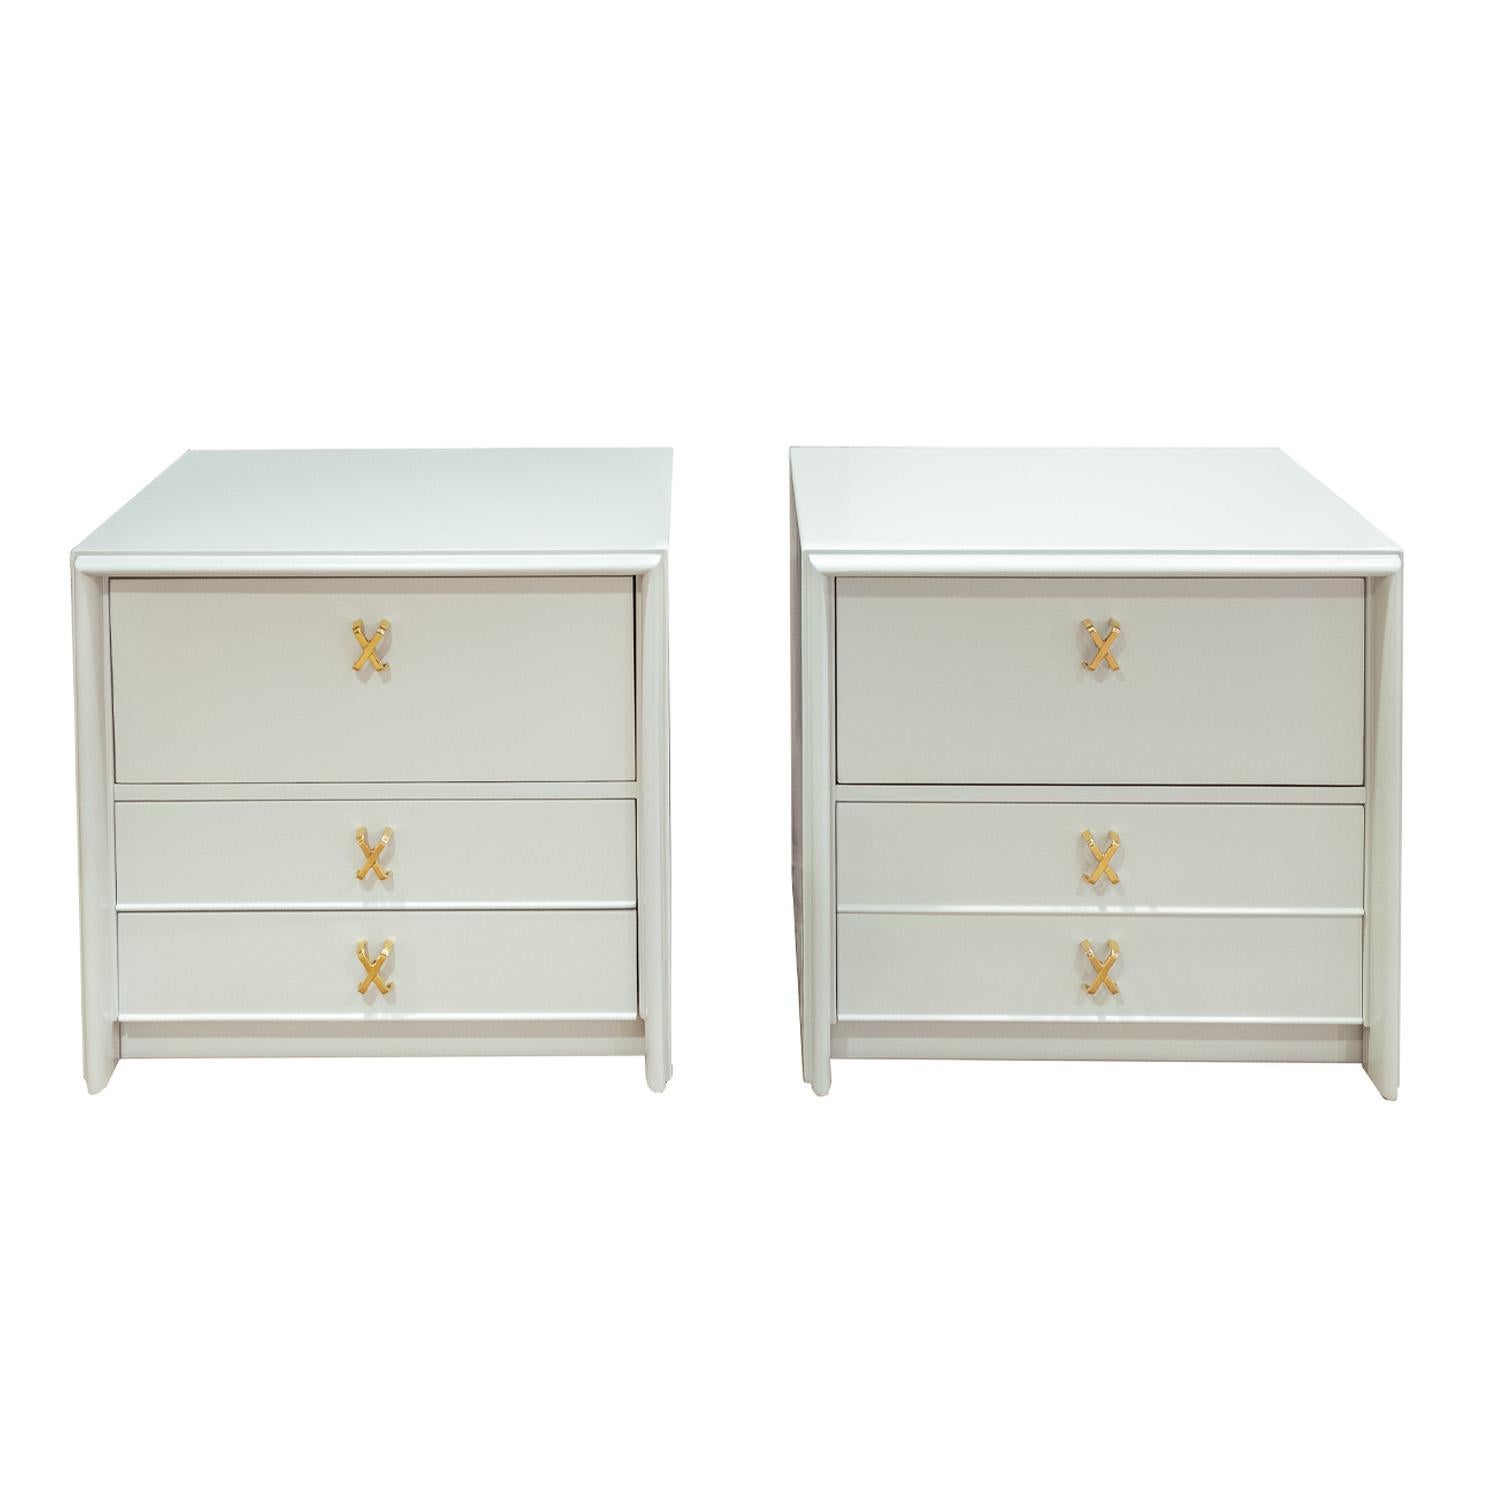 Pair of elegant bedside tables in pale gray with a hint of blue lacquer with polished brass X pulls by Paul Frankl for Johnson Furniture, American 1950's (signed “Johnson Furniture co. Grand Rapids Mich.” inside drawer). These have been completely